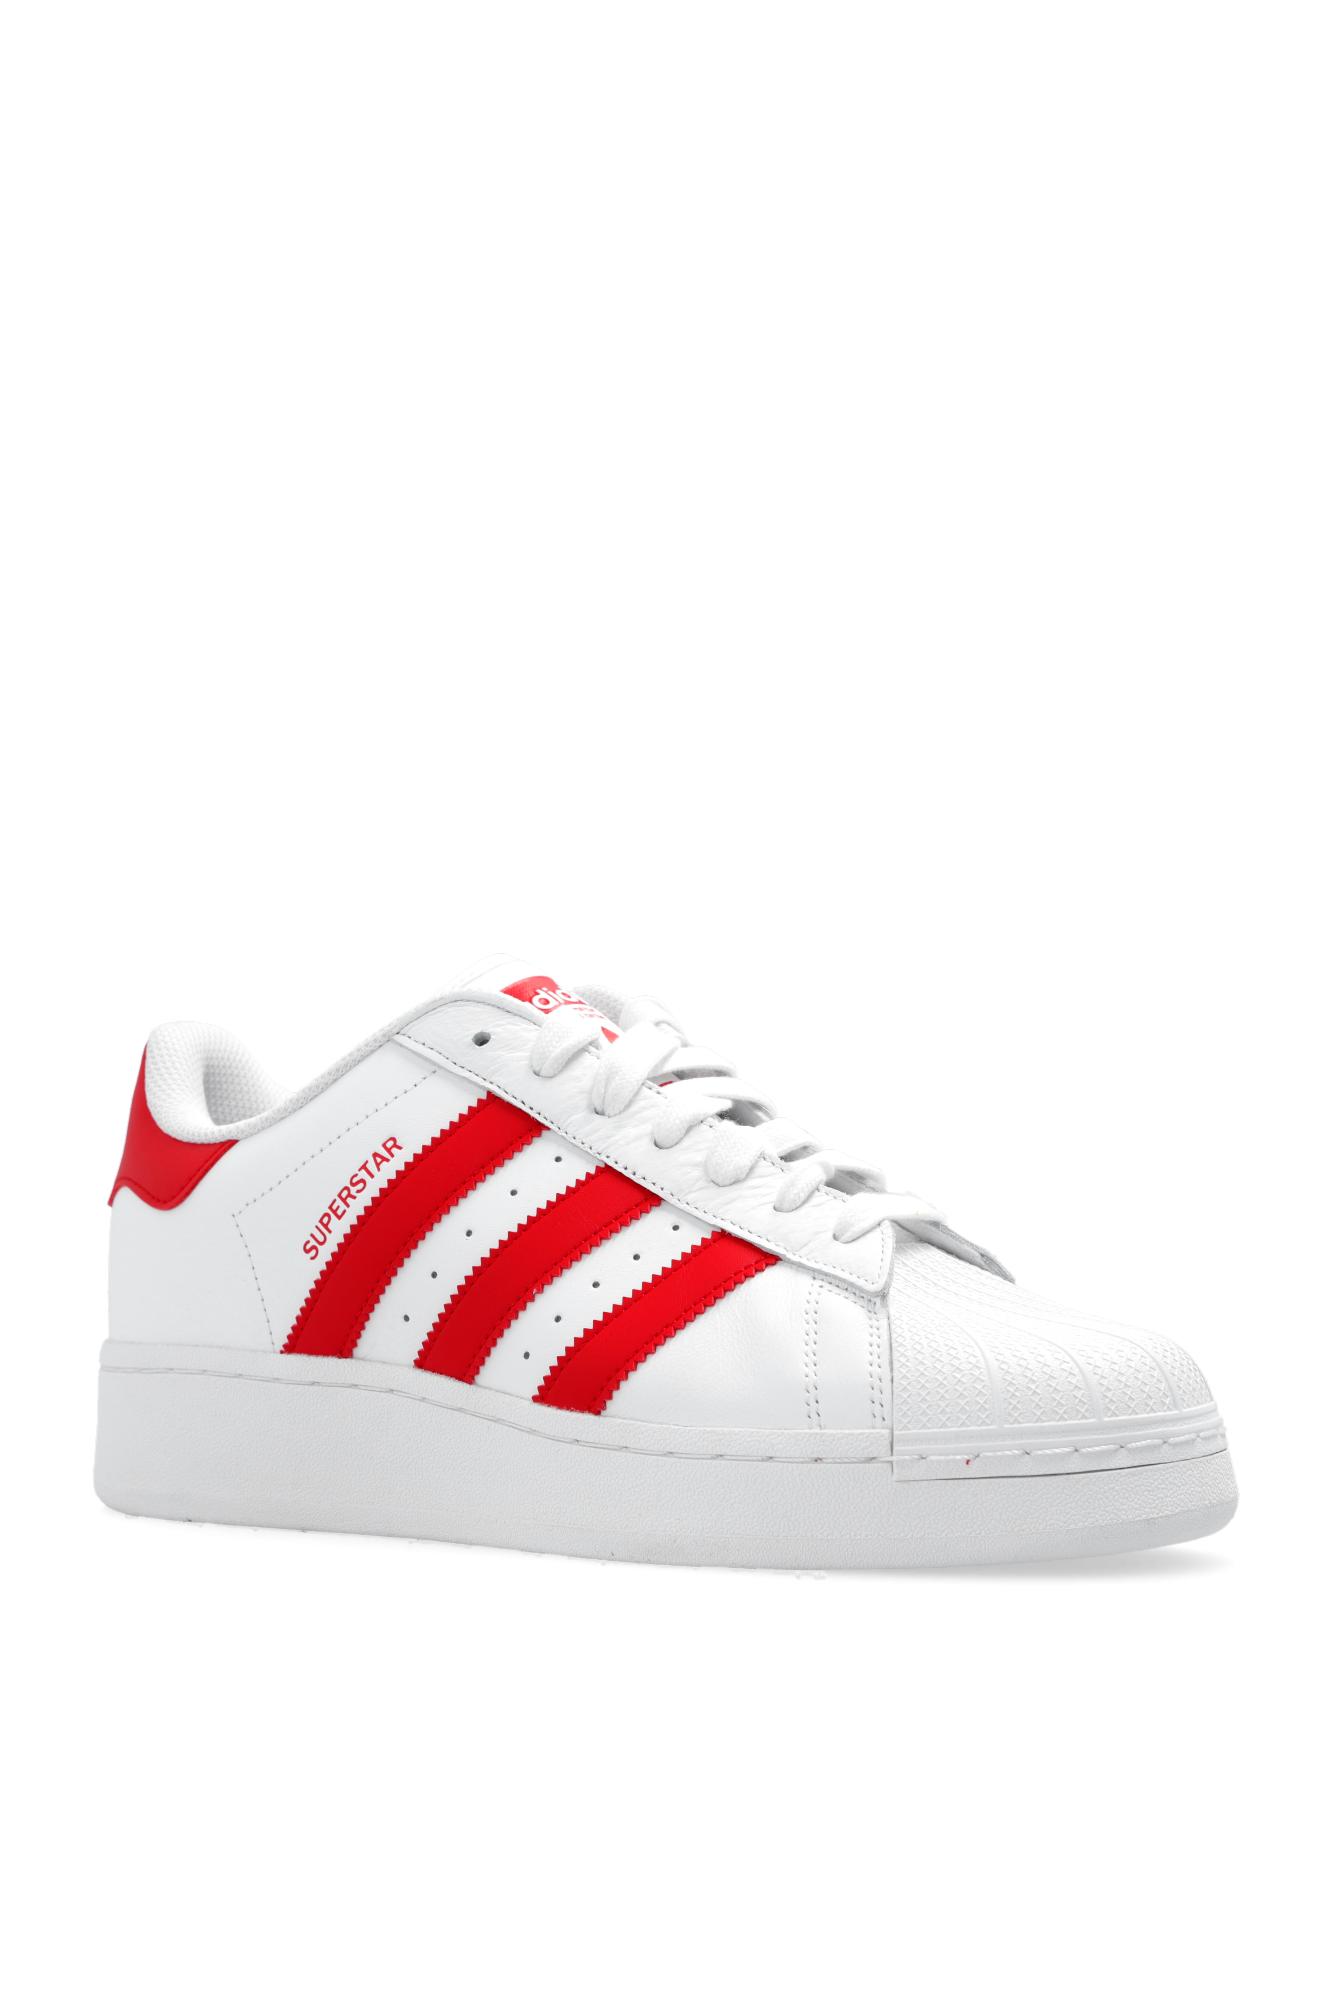 adidas Originals Superstar Leather Sneakers in Red for Men | Lyst